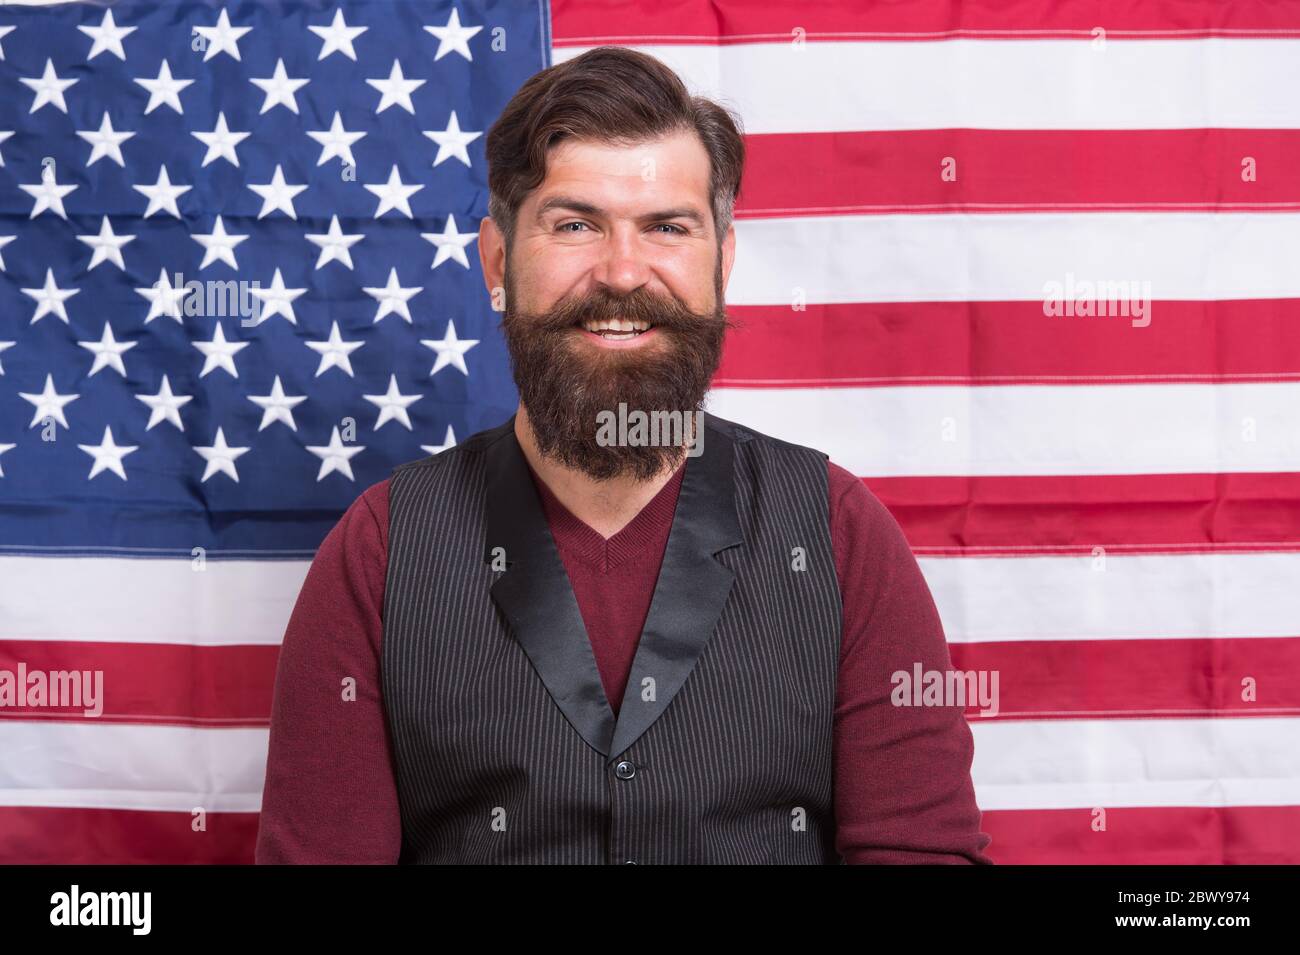 Feel patriotic. usa celebrate 4th of july. english language learning. happy holiday of independence day. follow american traditions. man devoted his motherland. independence day public holiday. Stock Photo